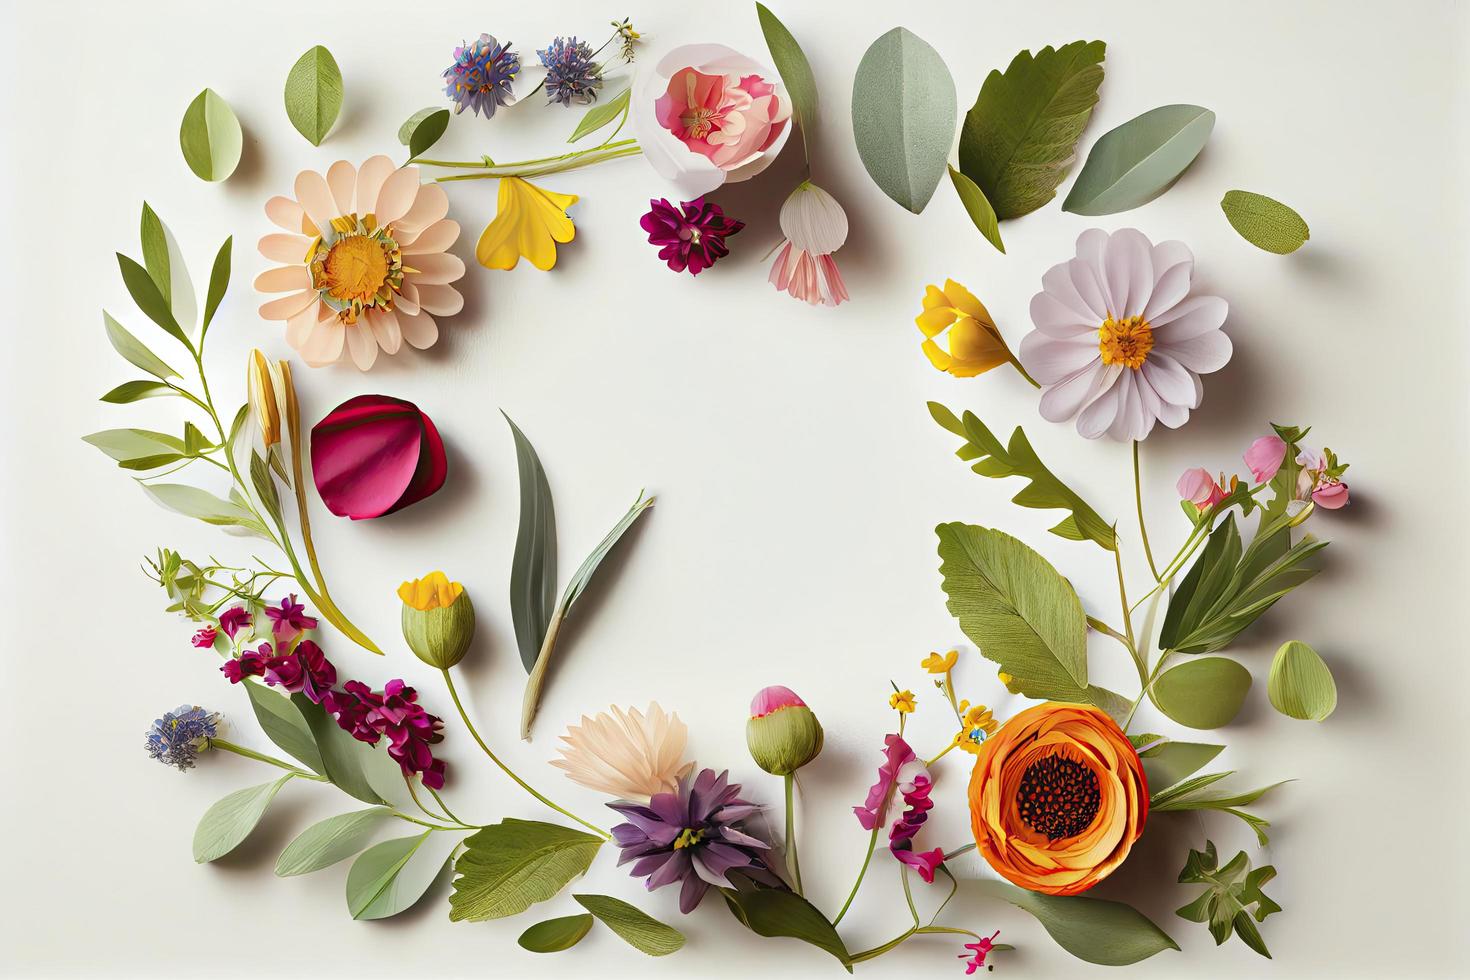 Flowers composition. Wreath made of various colorful flowers on white background photo